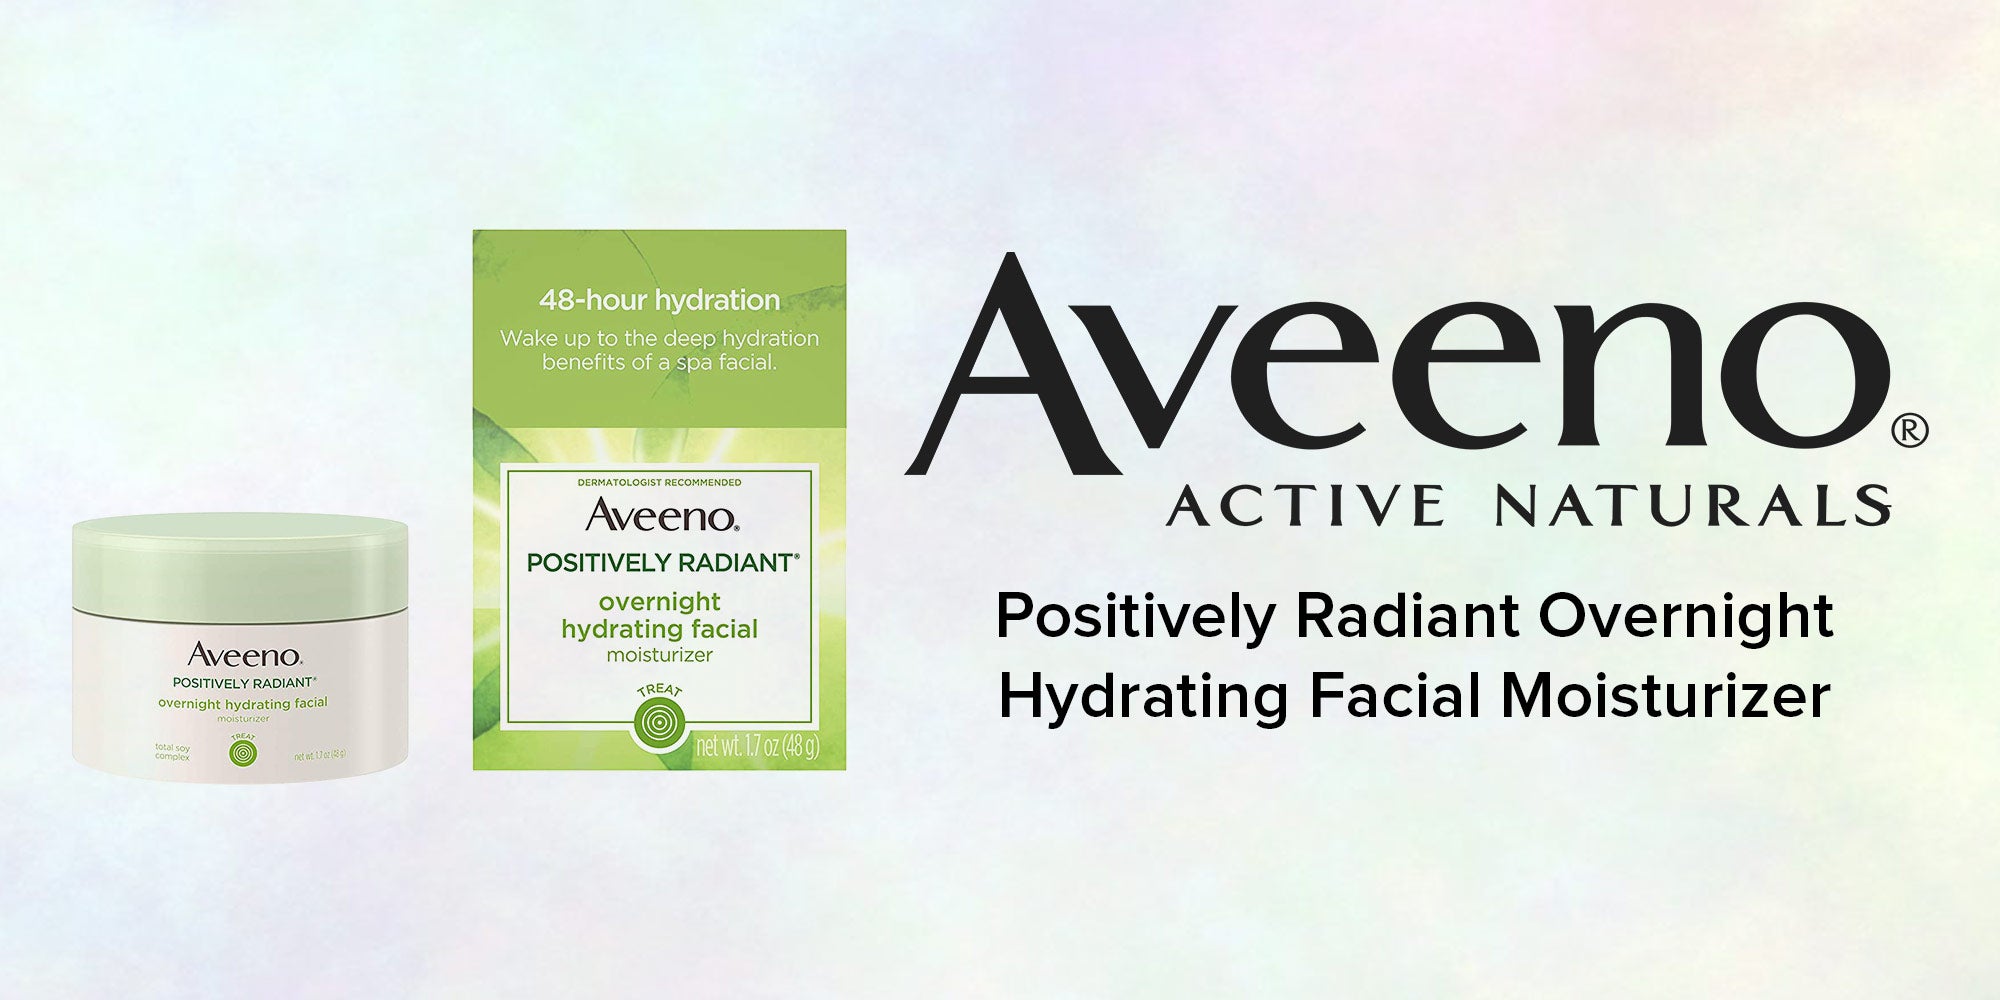 Active Naturals Positively Radiant Overnight Hydrating Facial Moisturizer 48grams